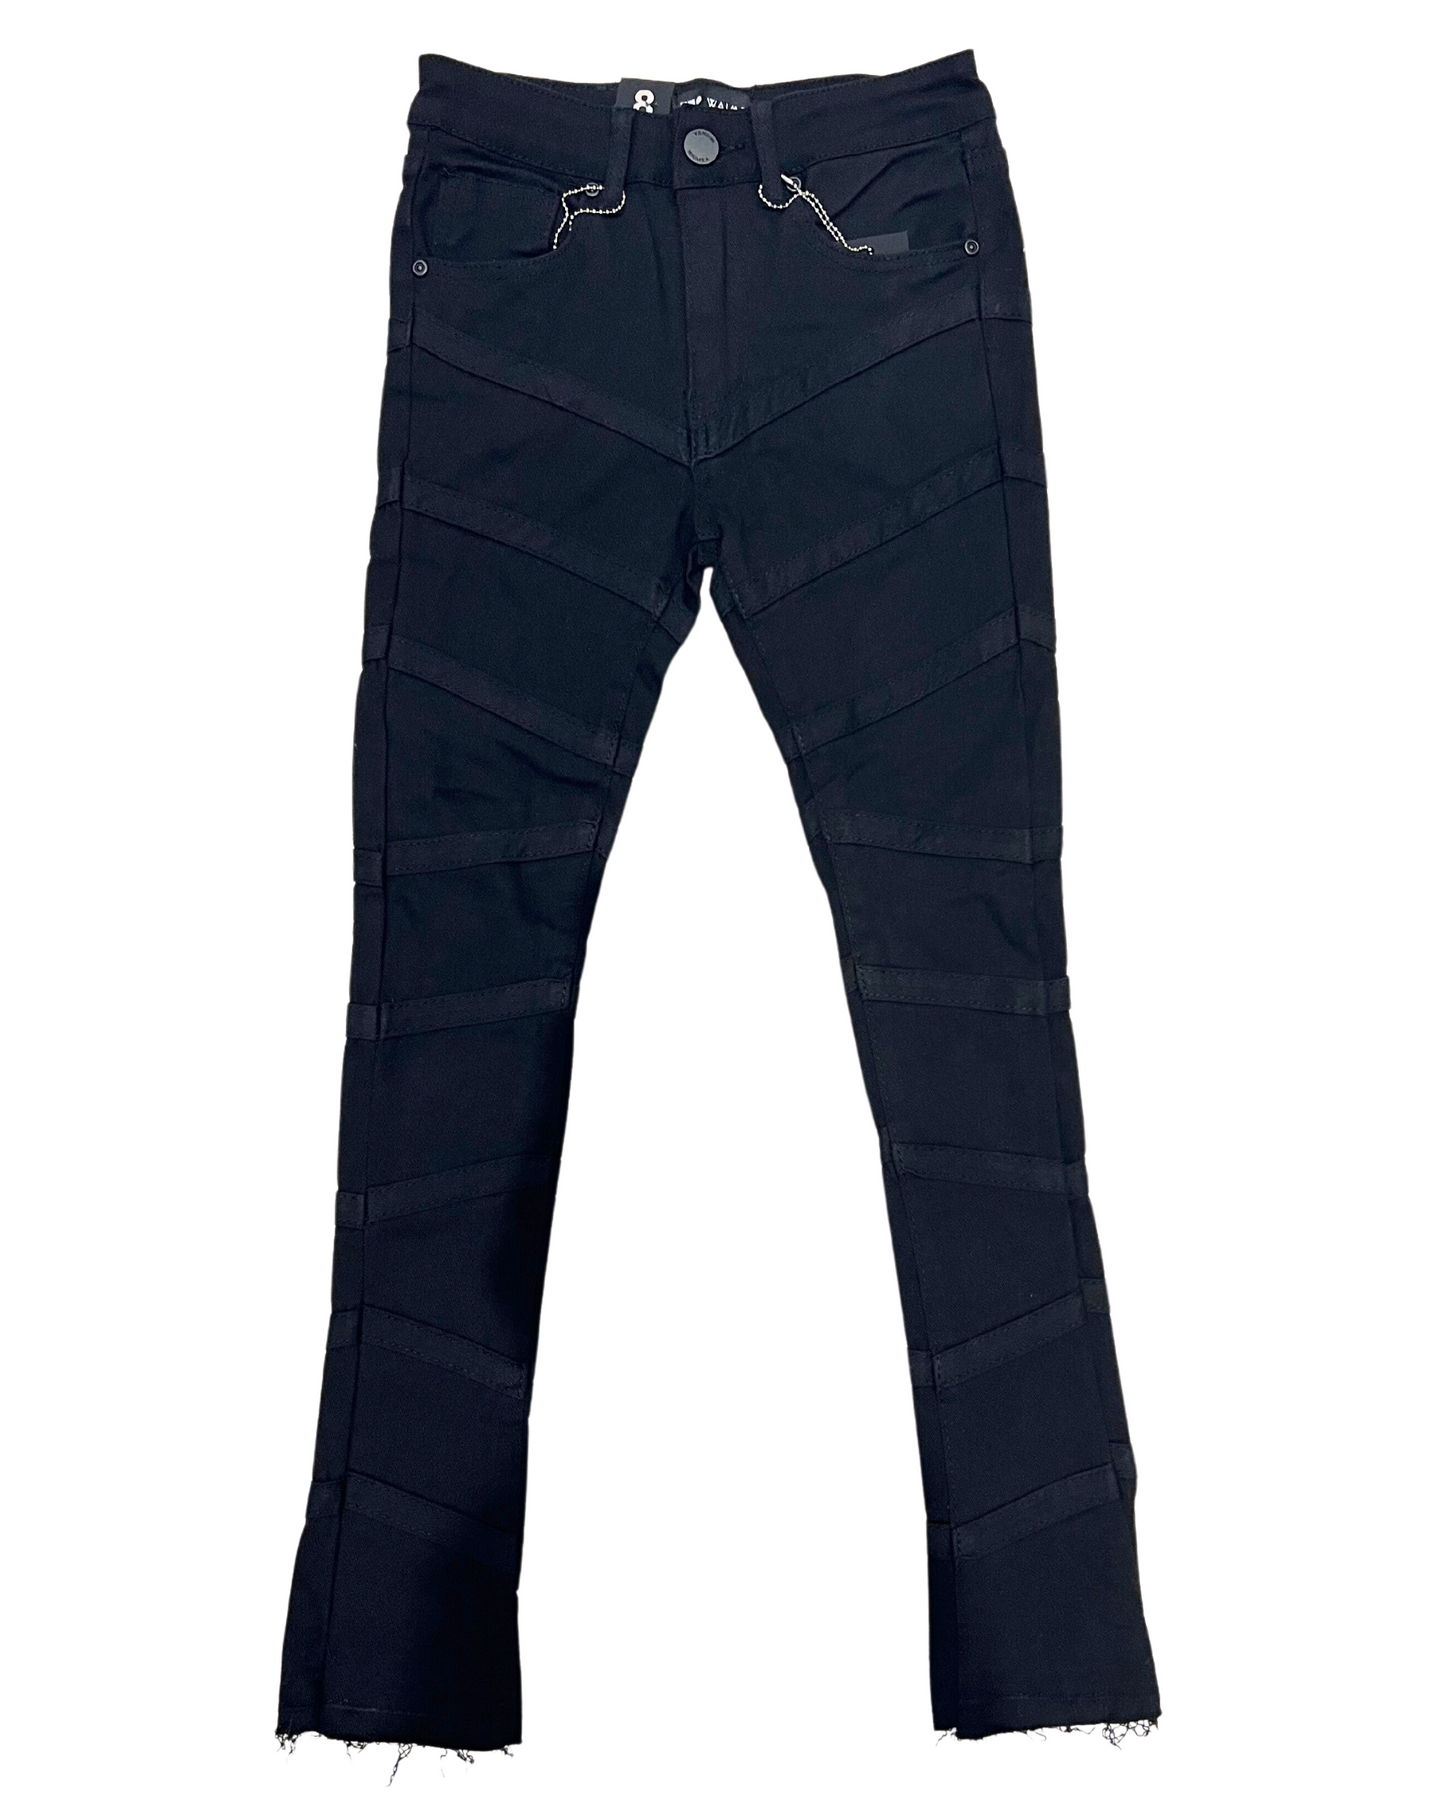 Kids Stacked Jeans 5854